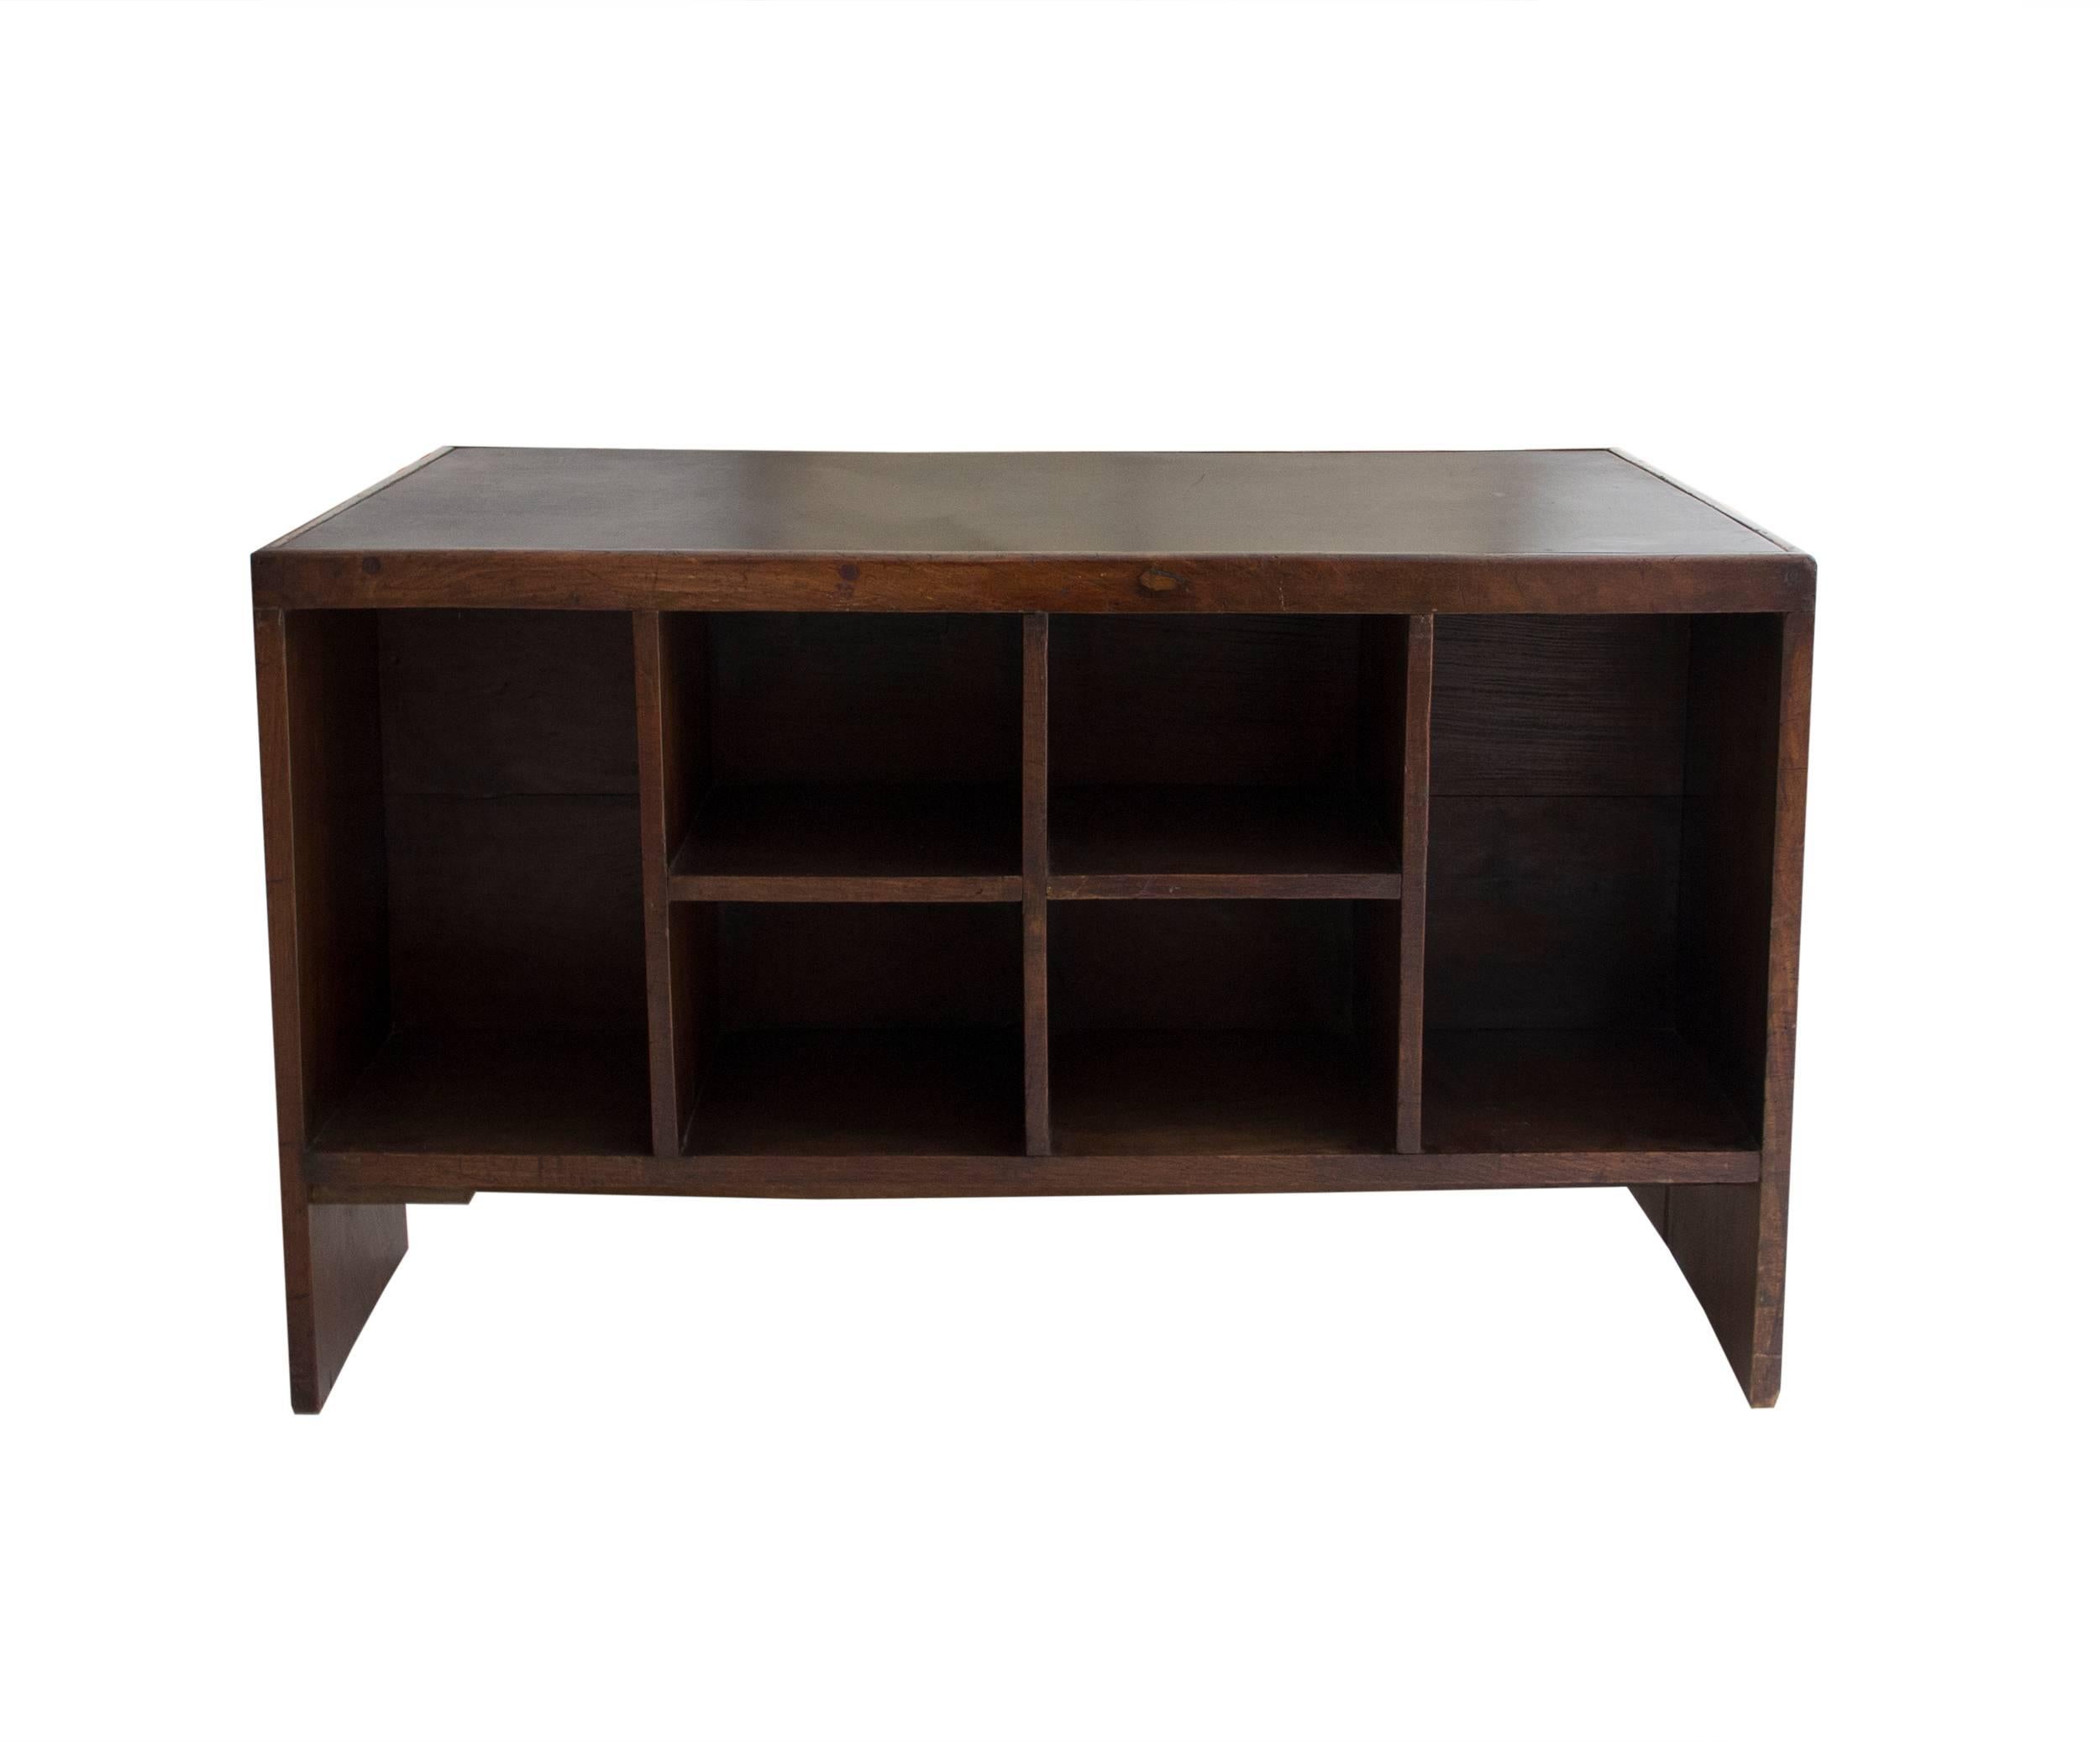 Pierre Jeanneret Office Desk for Chandigarh, Wood and Leather, circa 1950, India For Sale 3